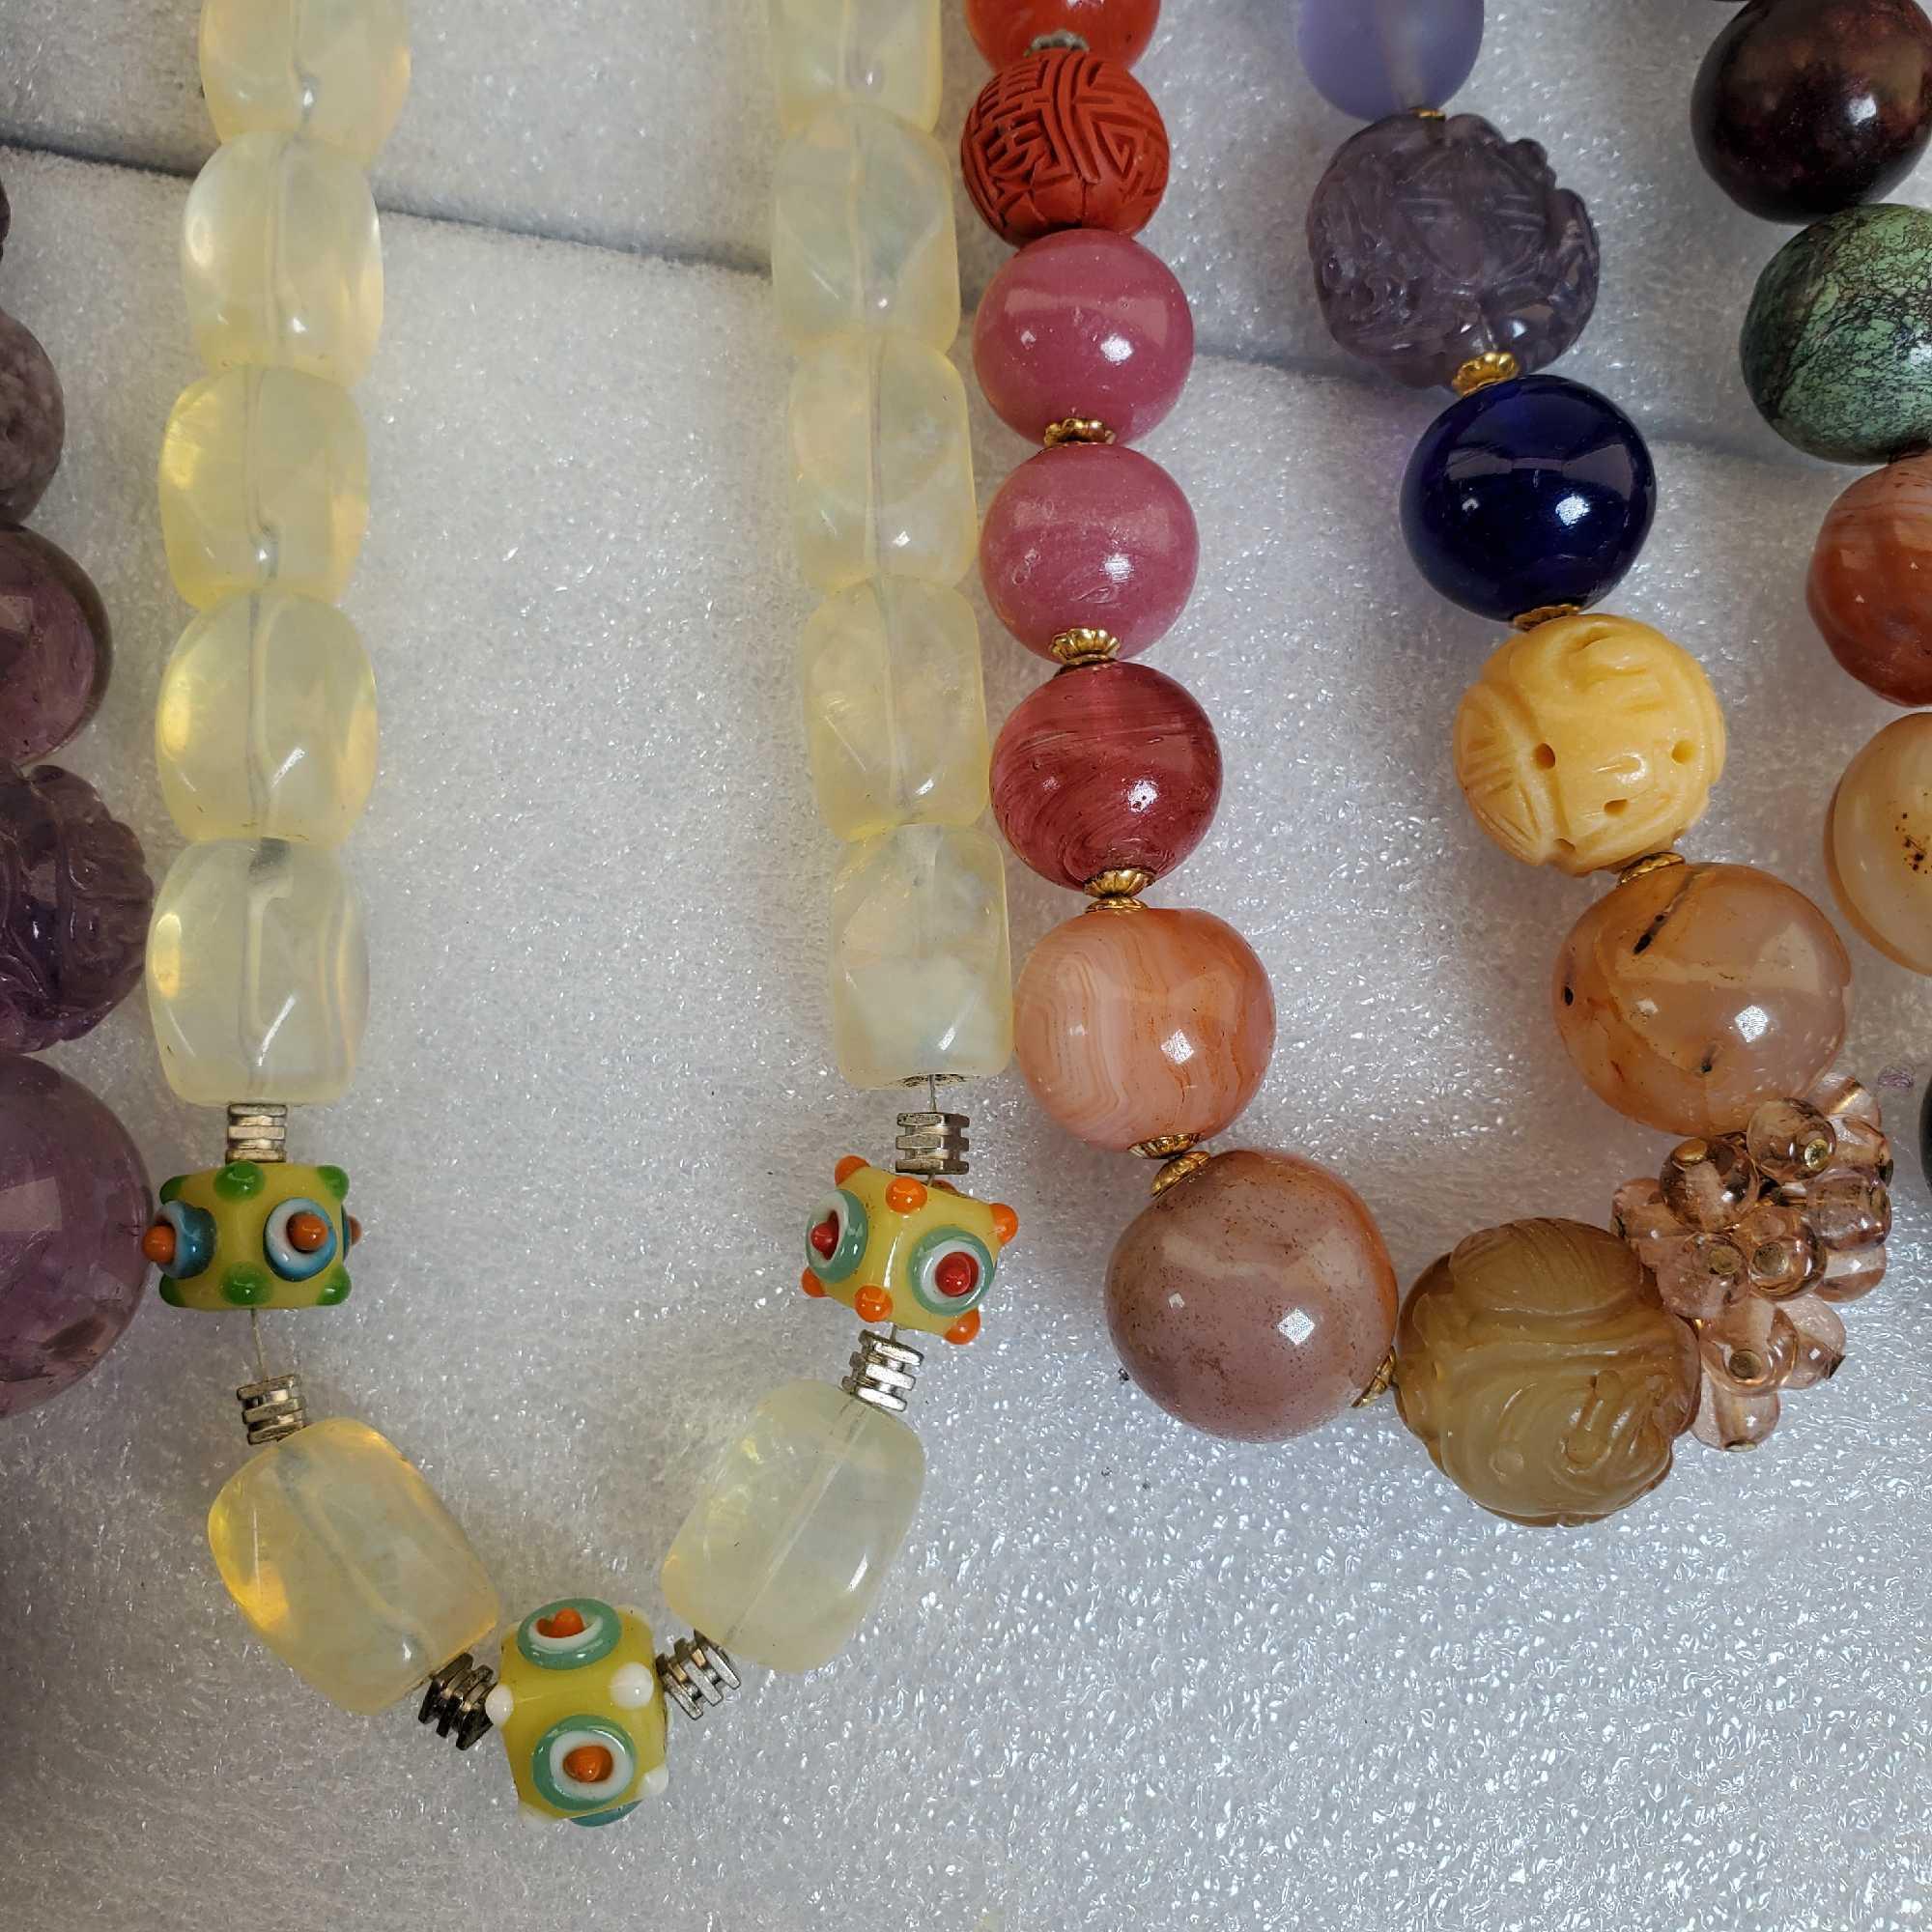 6 Vintage Trade Bead Necklaces From Around The World Bead Collection